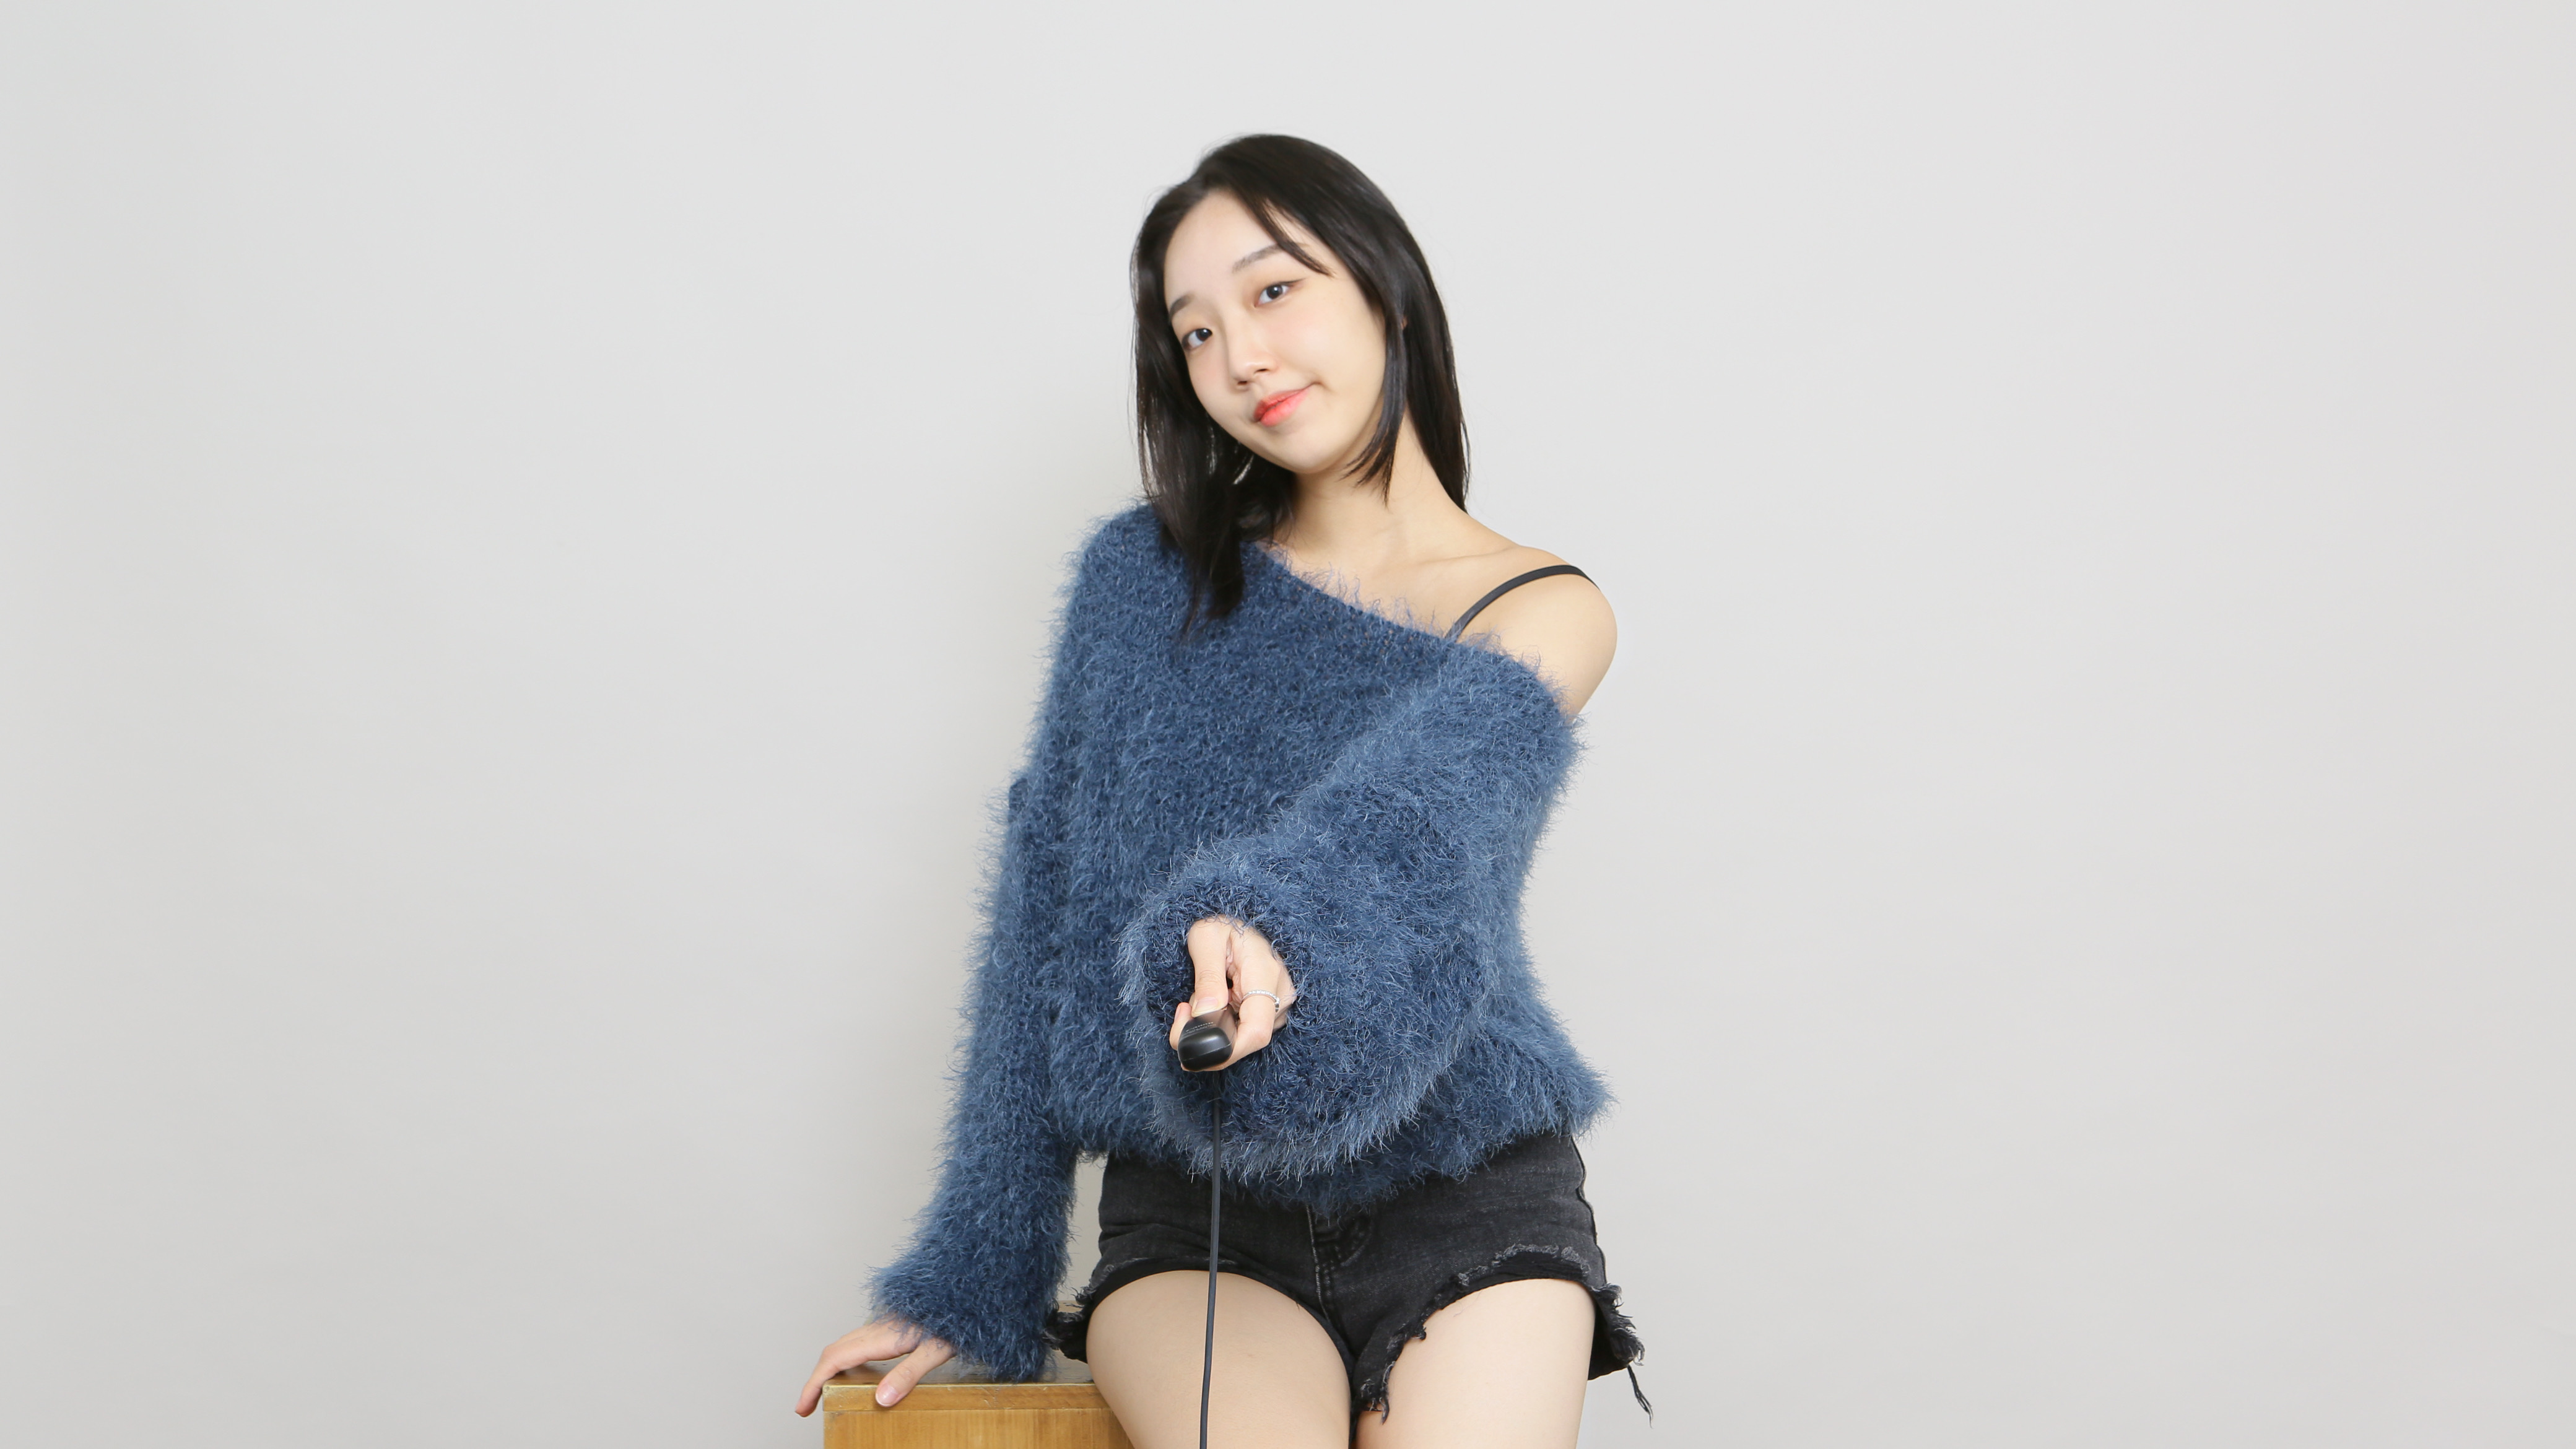 FIDM Fashion Design Student HyeRin Lee wearing a fuzzy blue off the shoulder sweater and black shorts as she tilts her head and points at the camera